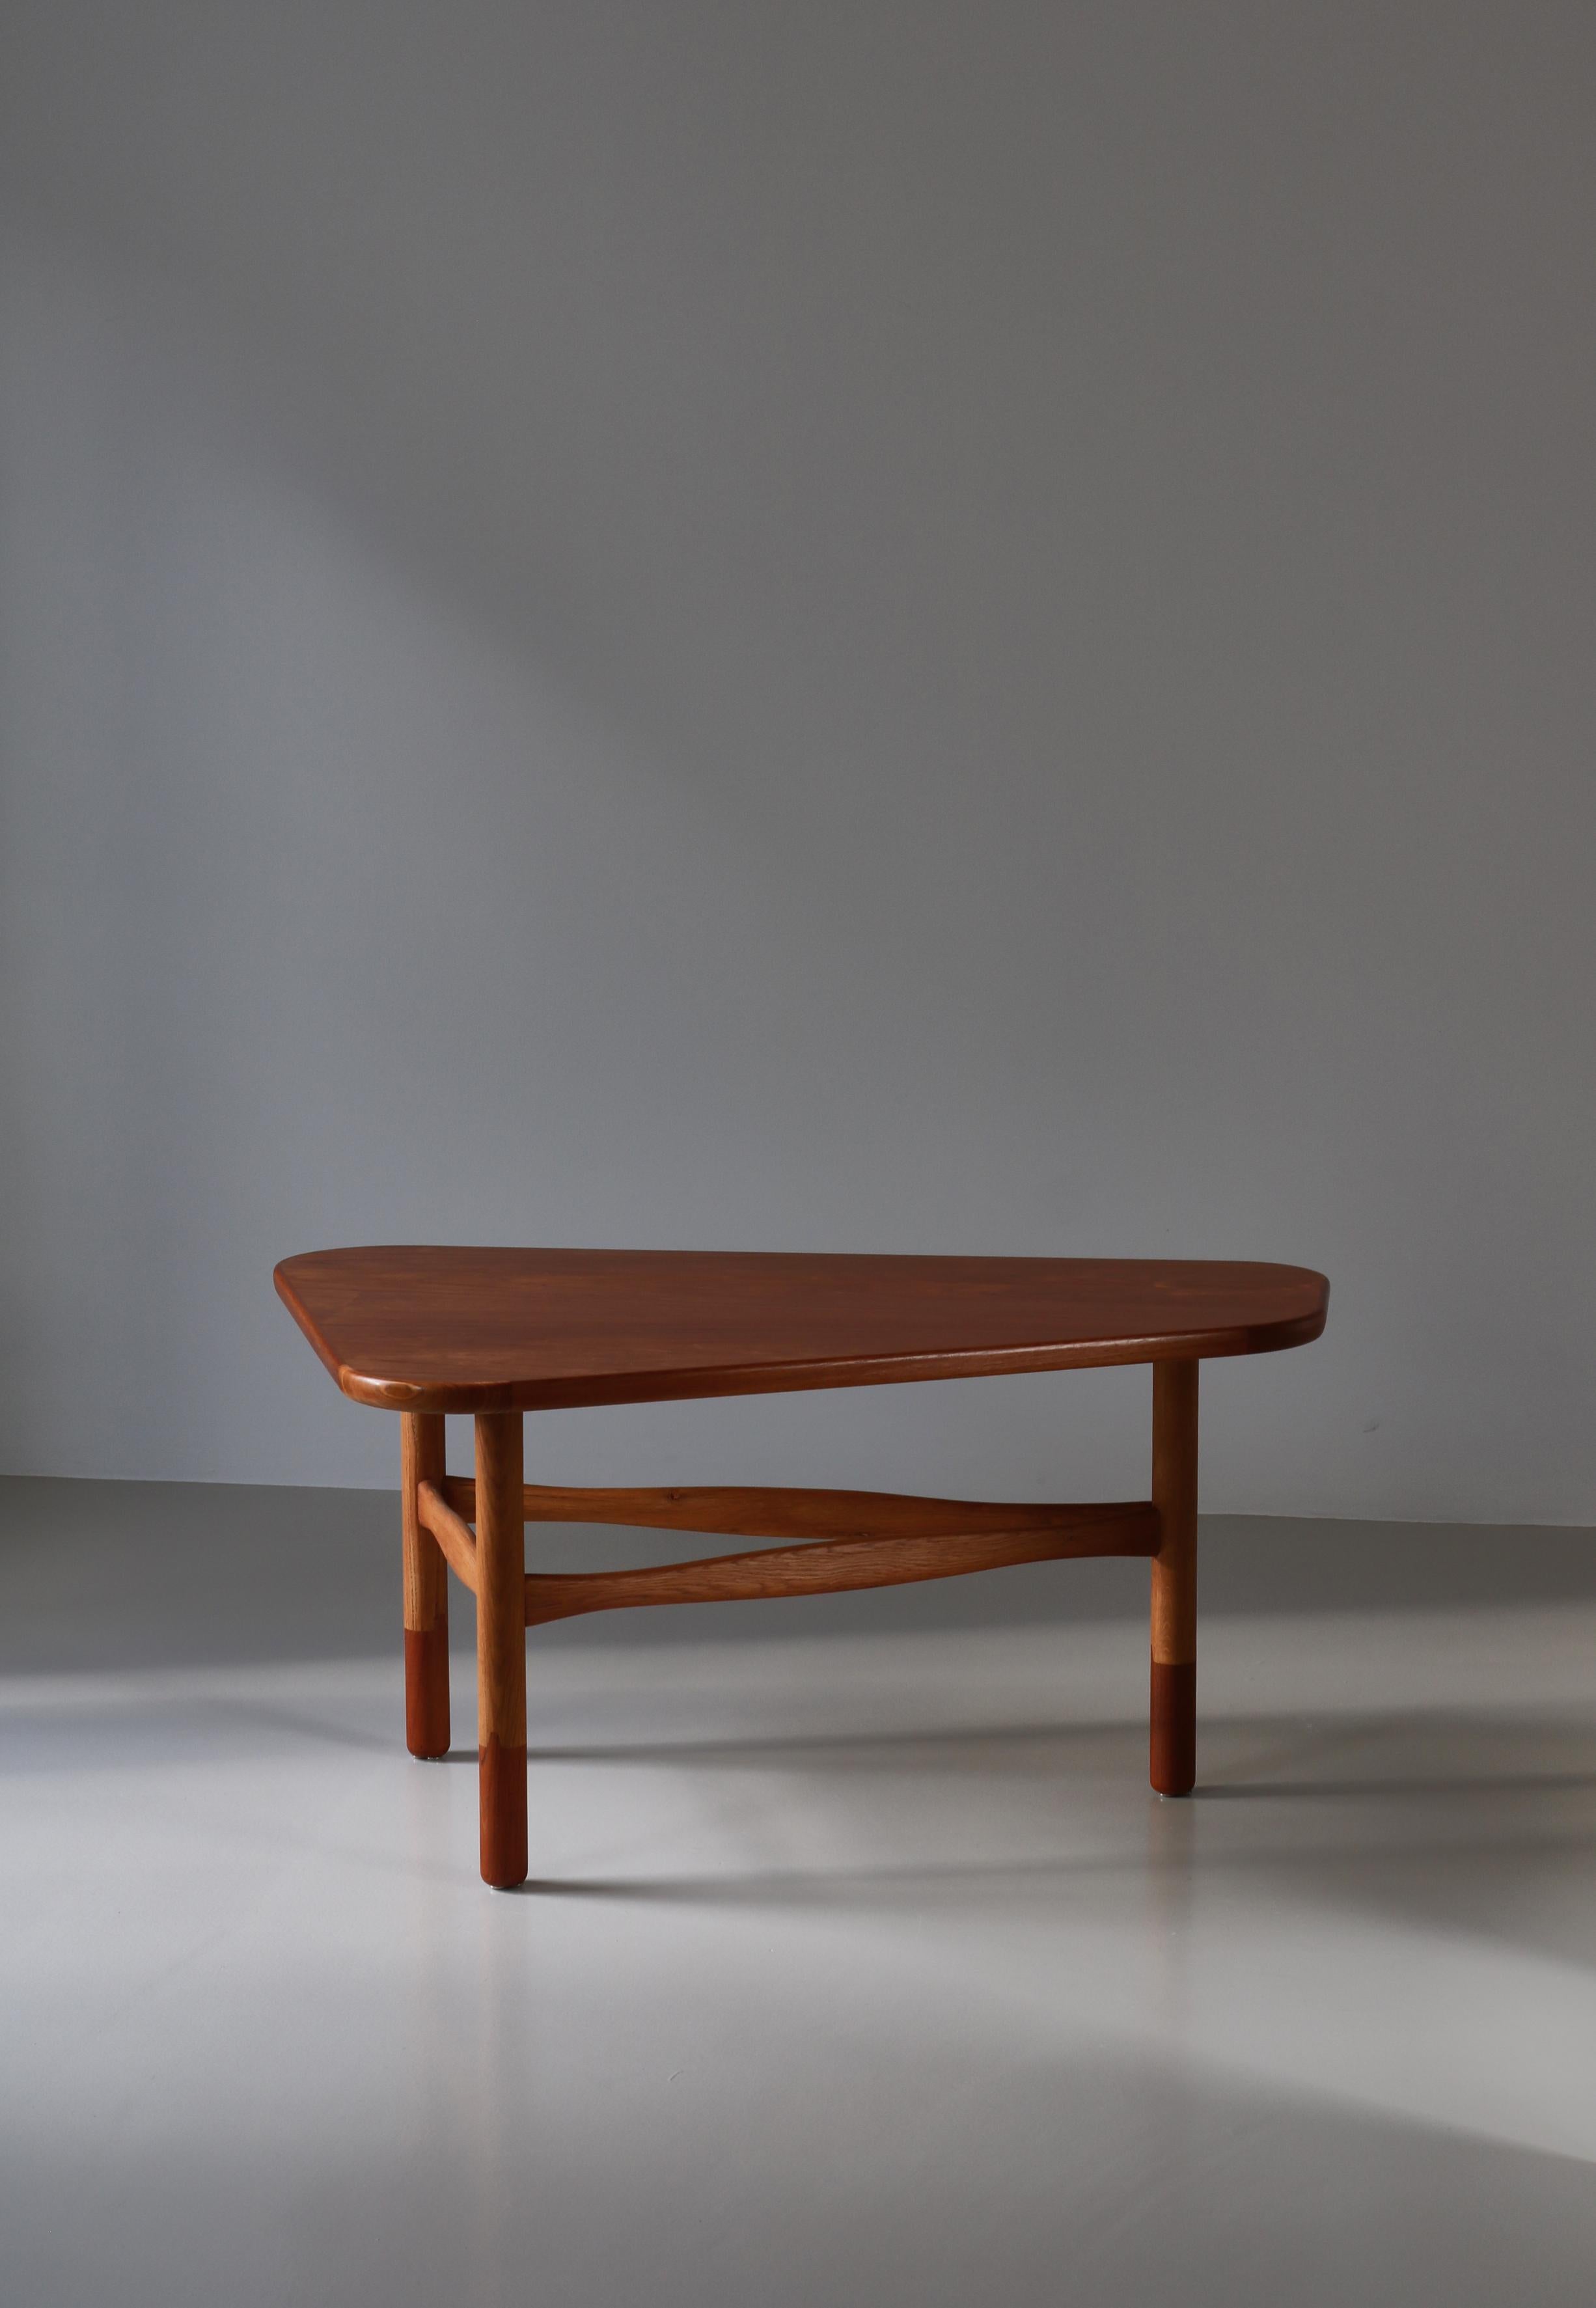 Rare chunky coffee table designed by Yngve Ekström in the 1950s and produced by Westbergs Möbler in Sweden. This wonderful table has a gently rounded triangular teakwood top which sits on three legs in solid oak that are joined with gently curved